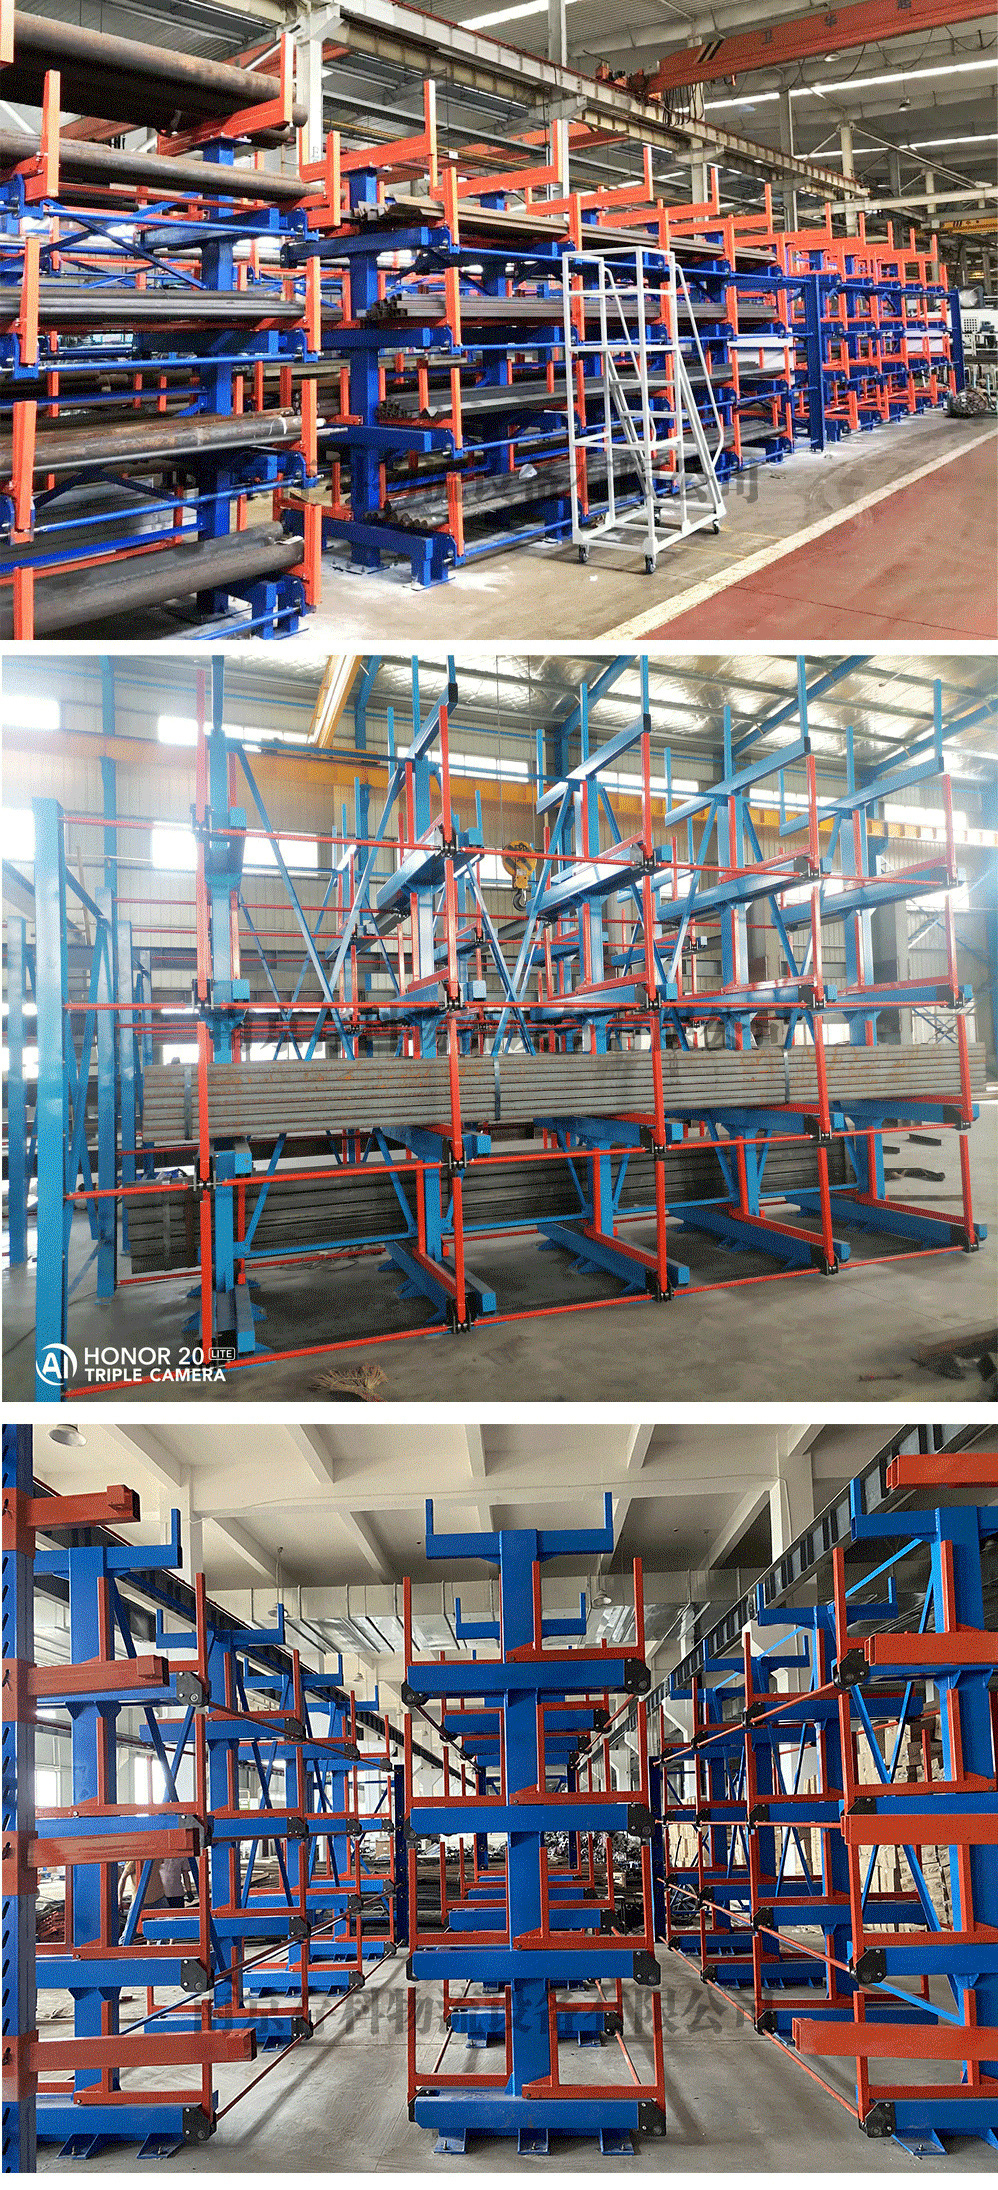 Telescopic Cantilever Shelf CK-SS-99 Storage Pipe Bar Extended Material Shelf Storage Department